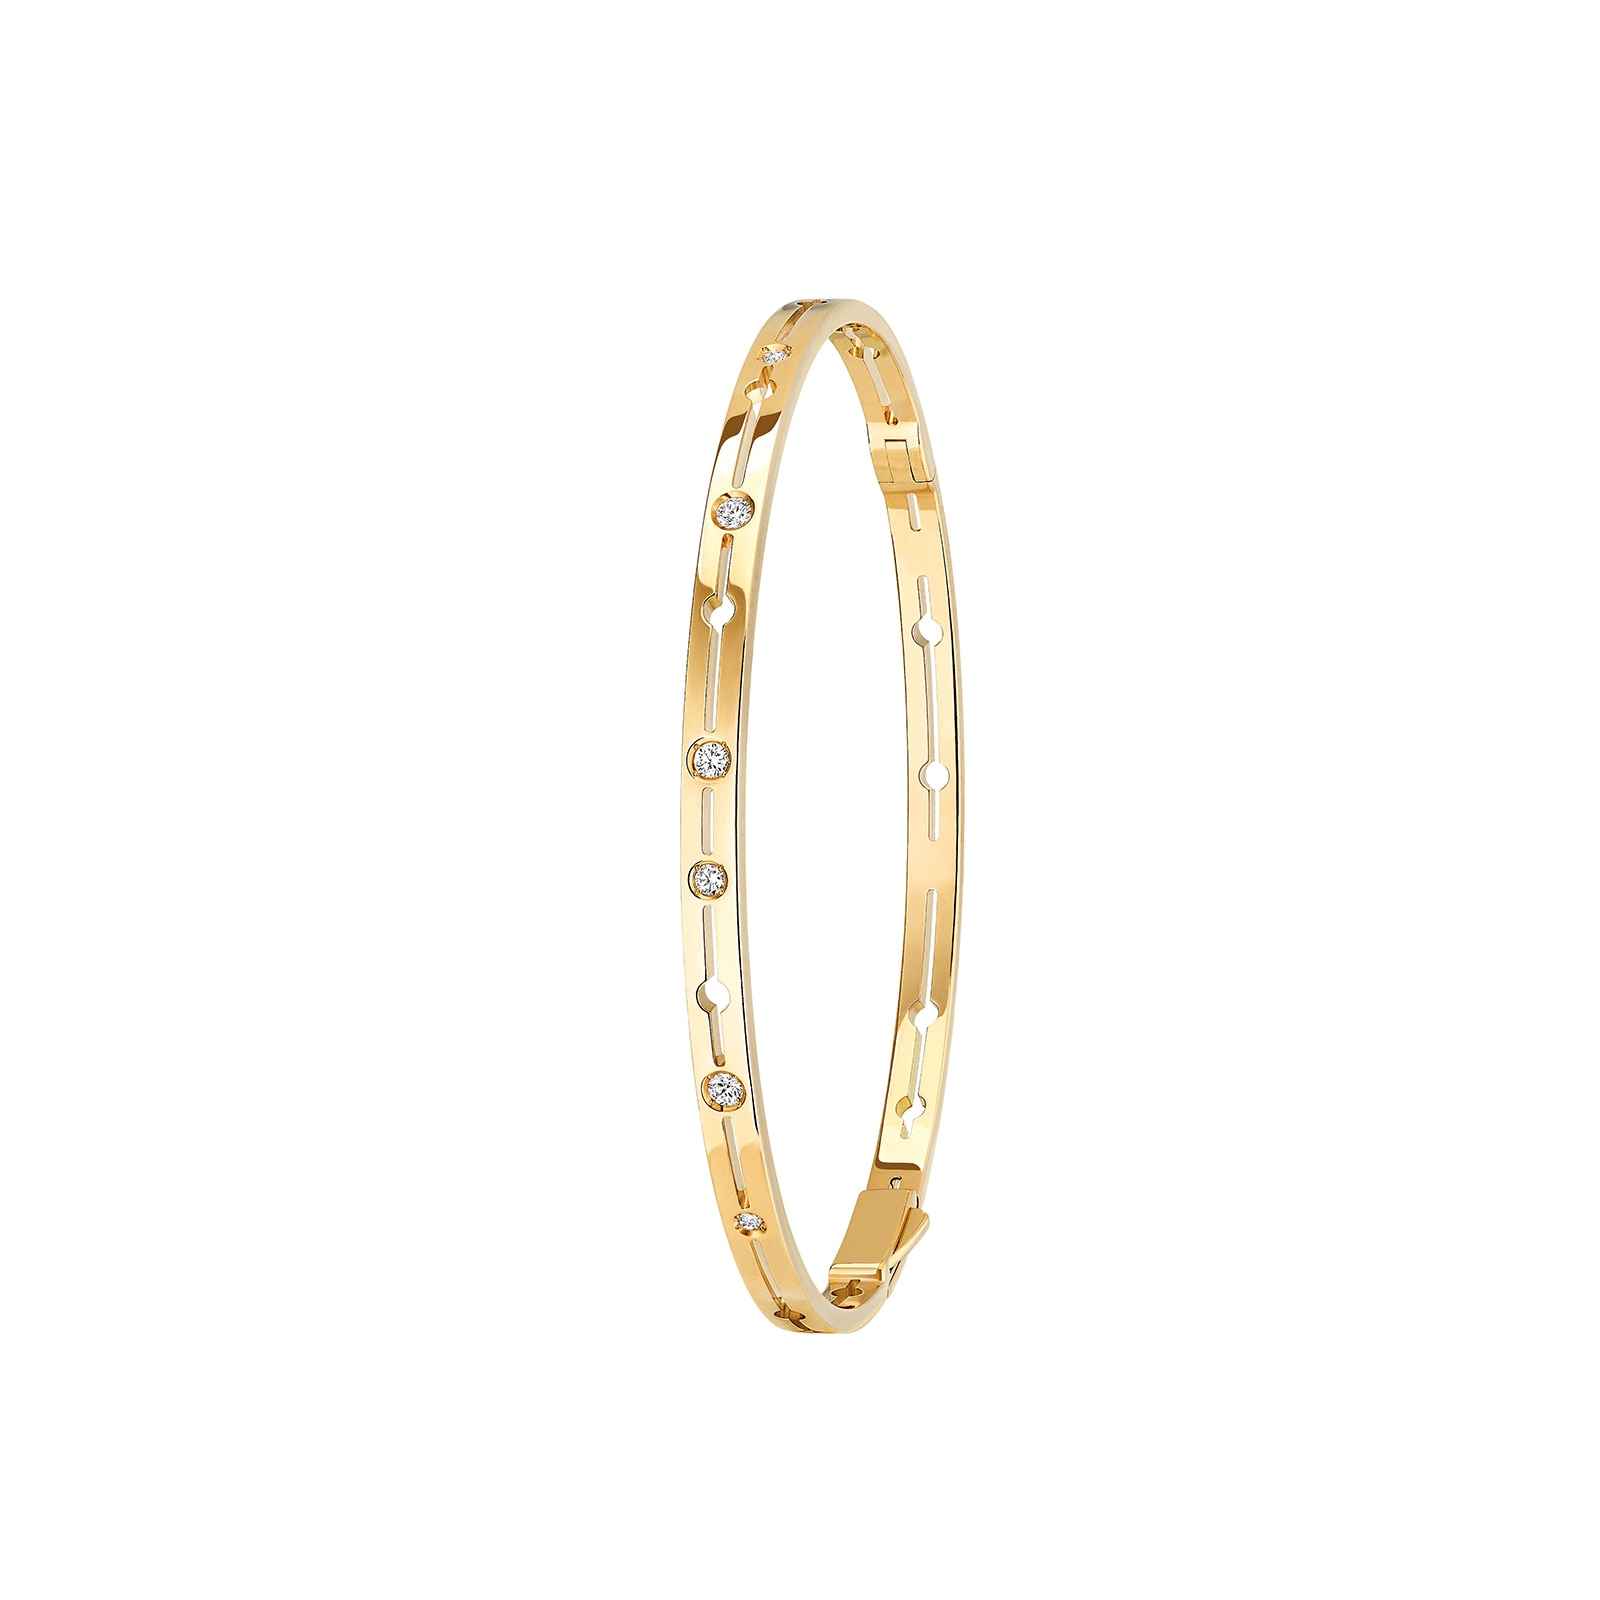 Purchase Menottes dinh van R10 woven cord bracelet, yellow gold